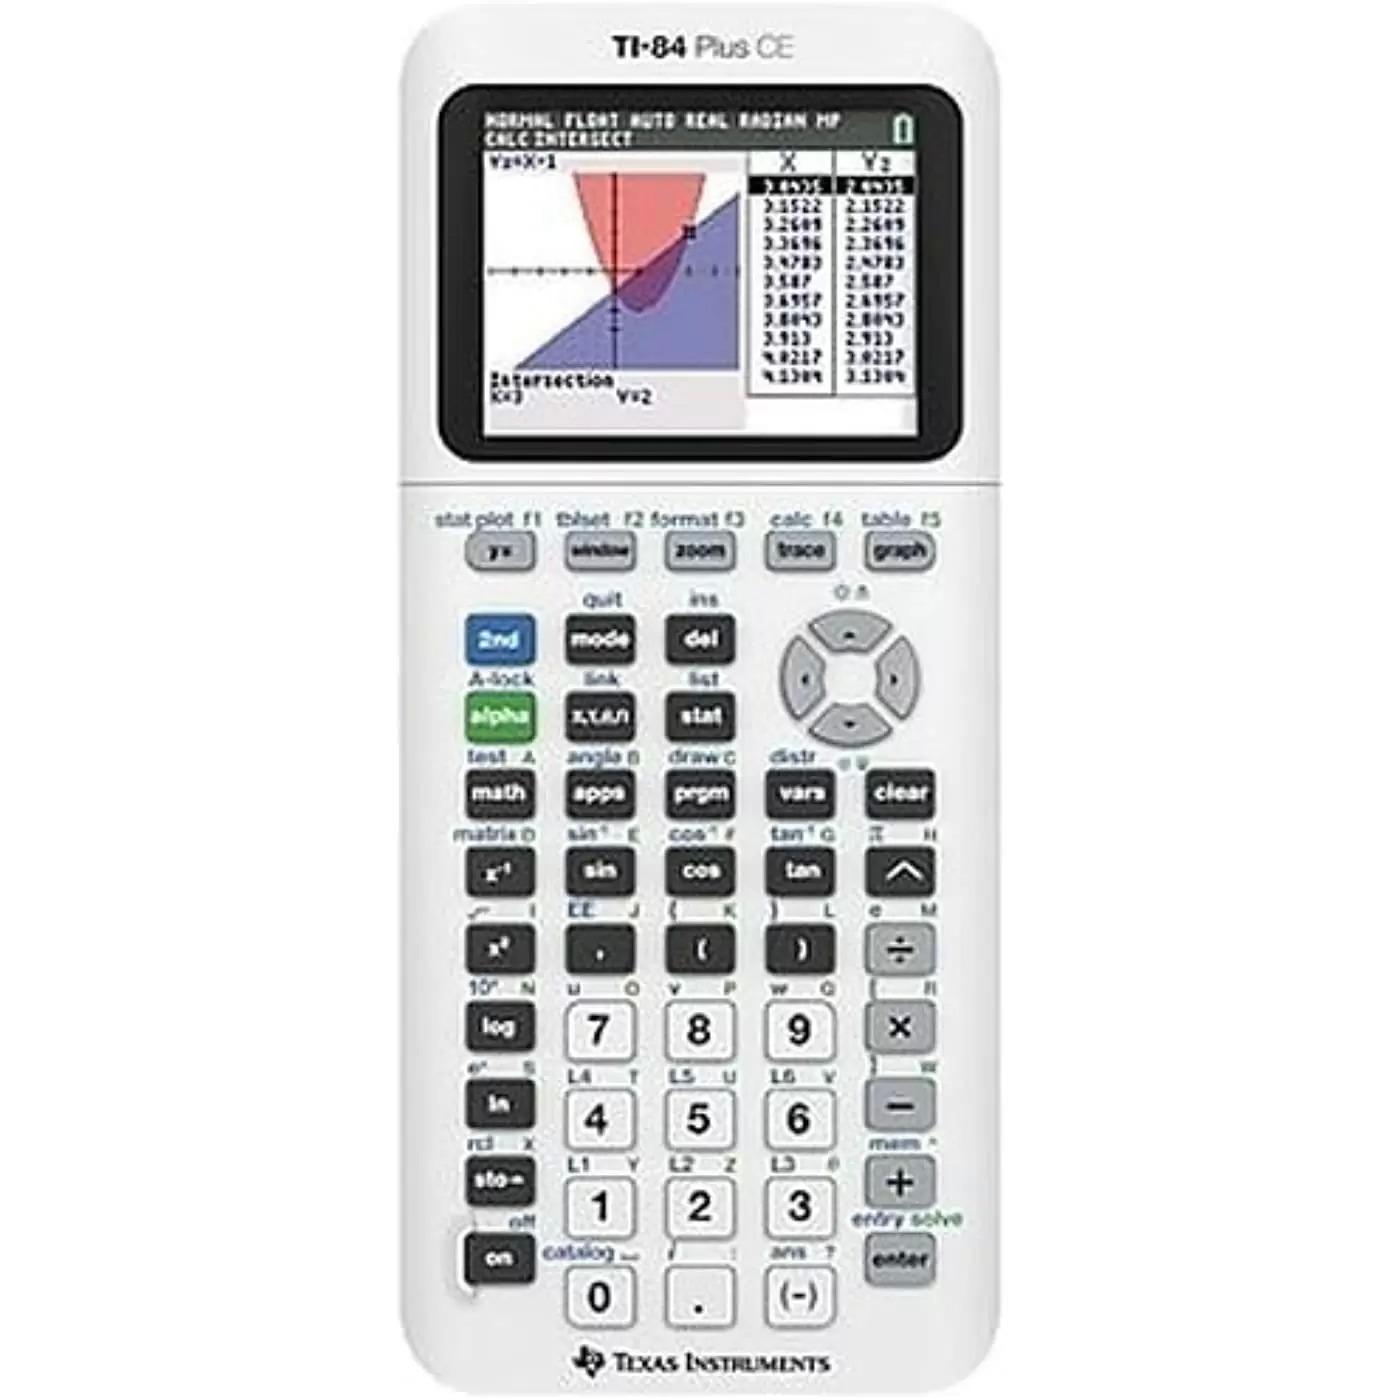 Texas Instruments TI-84 Plus CE Color Graphing Calculator for $79.99 Shipped